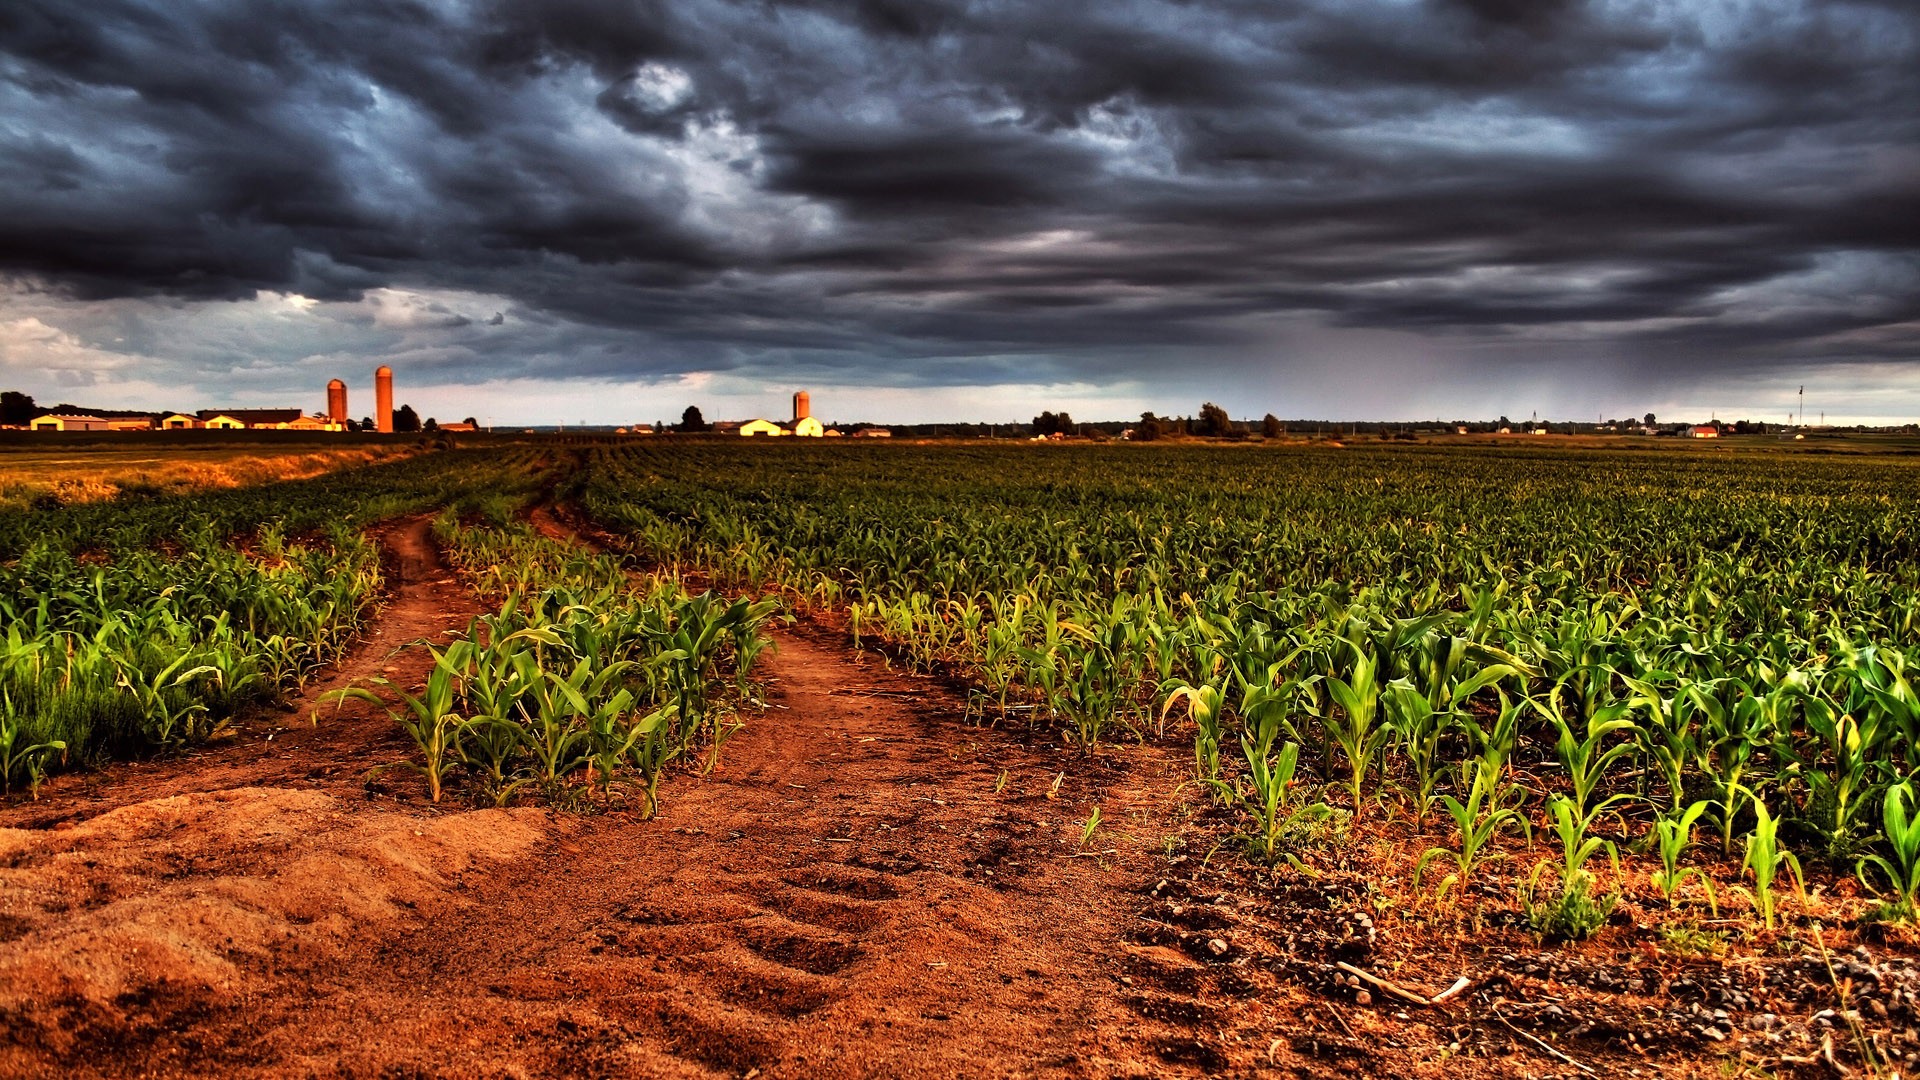 General 1920x1080 field corn landscape HDR overcast Agro (Plants) plants outdoors clouds